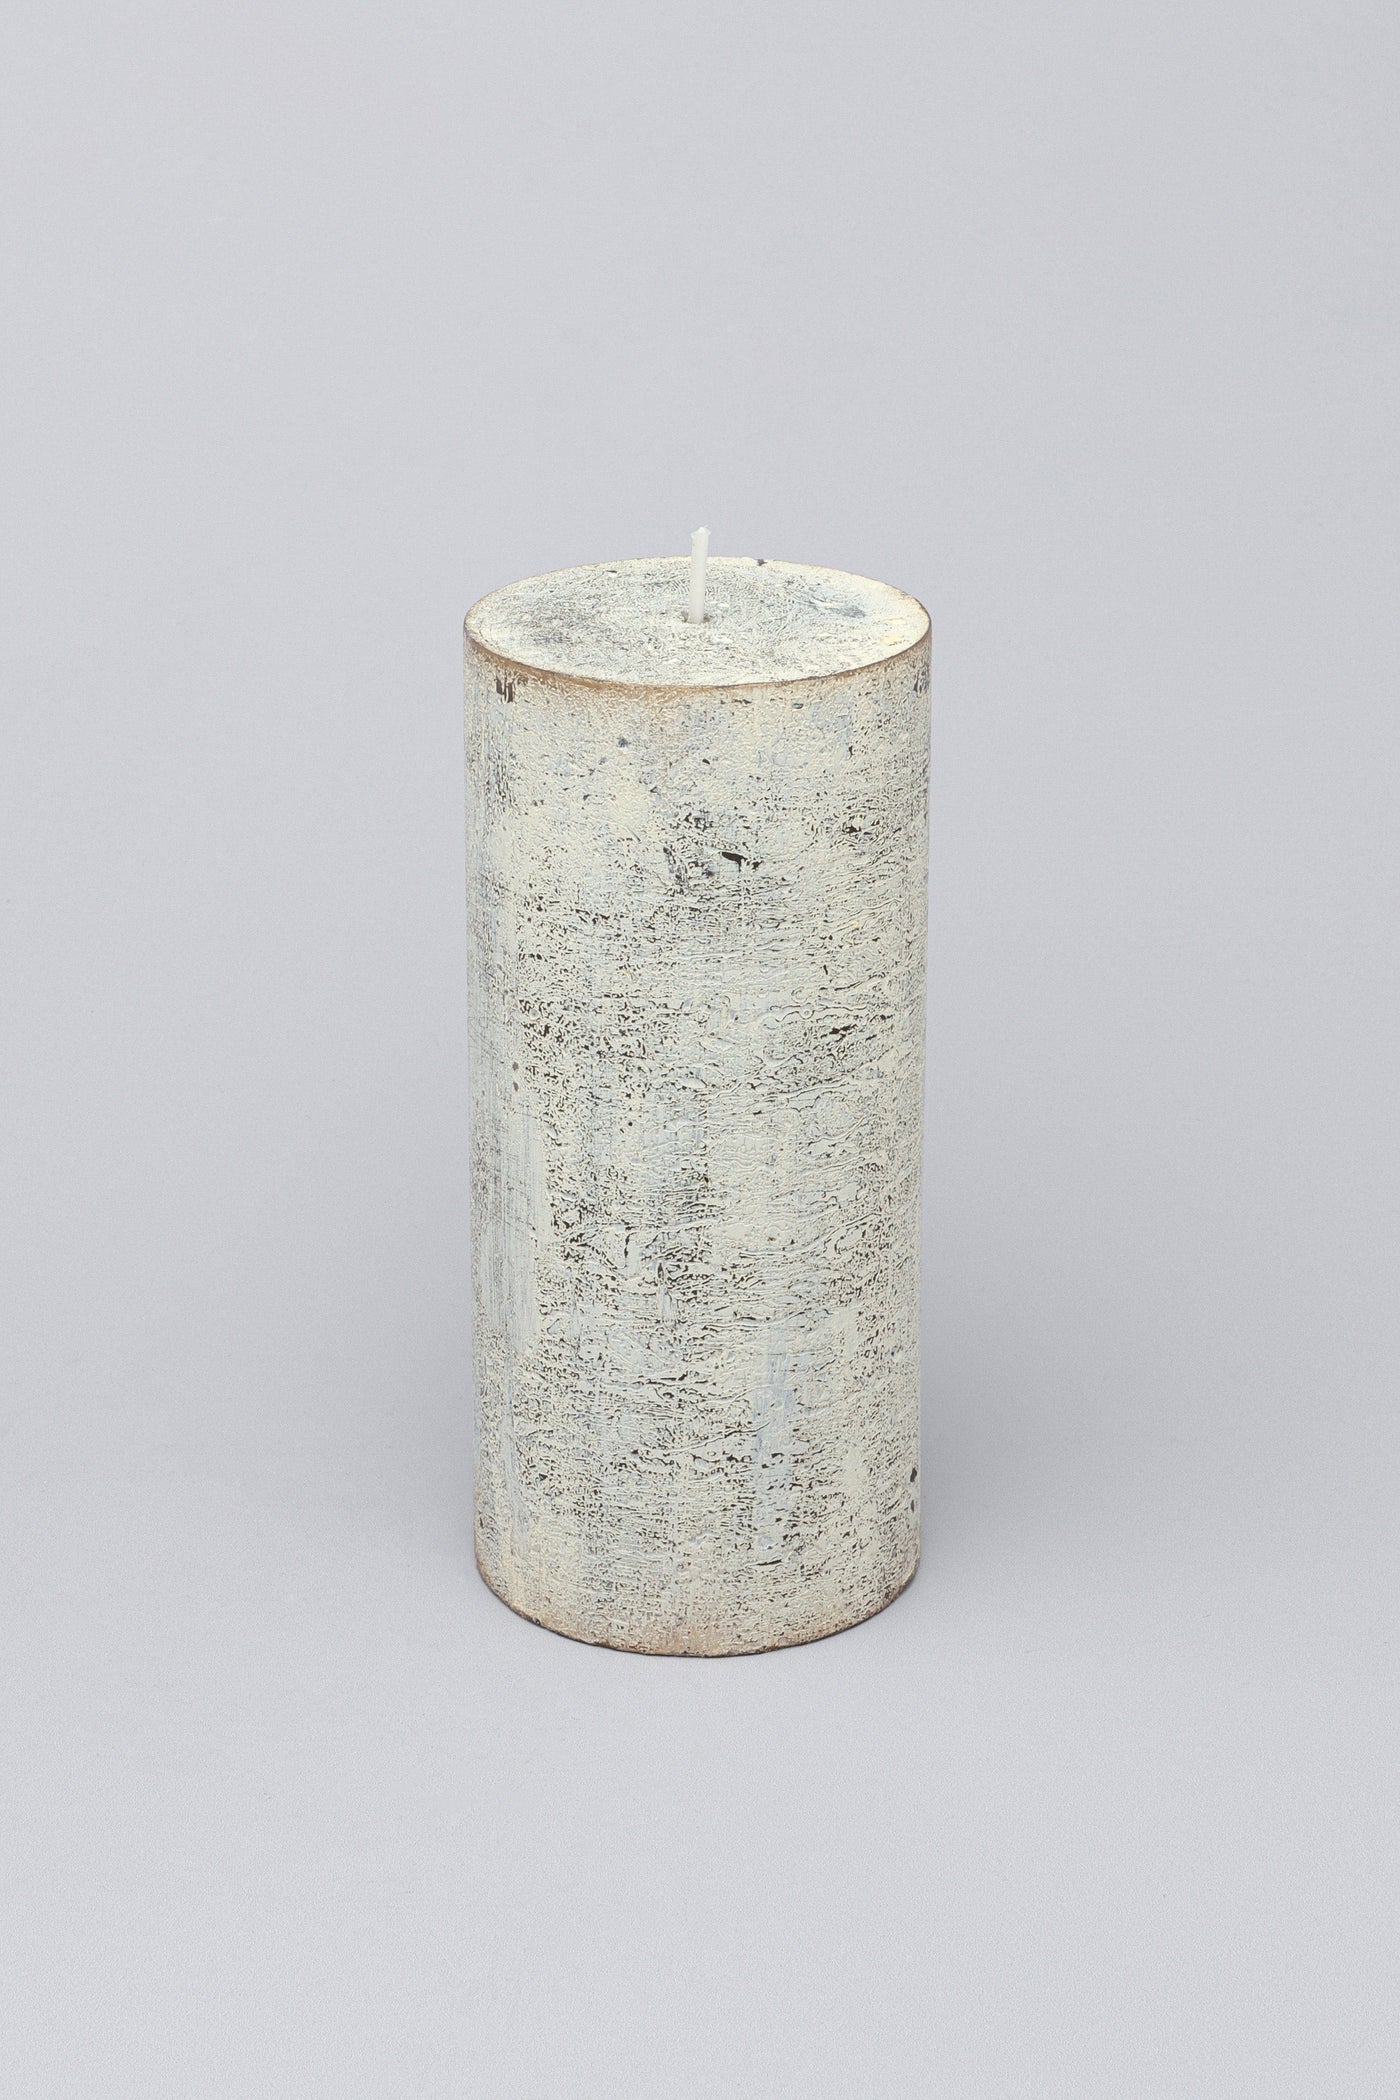 G Decor Candles Grey / Large Vivian Antique Marble Beige Aged Two Tone Pillar Candle